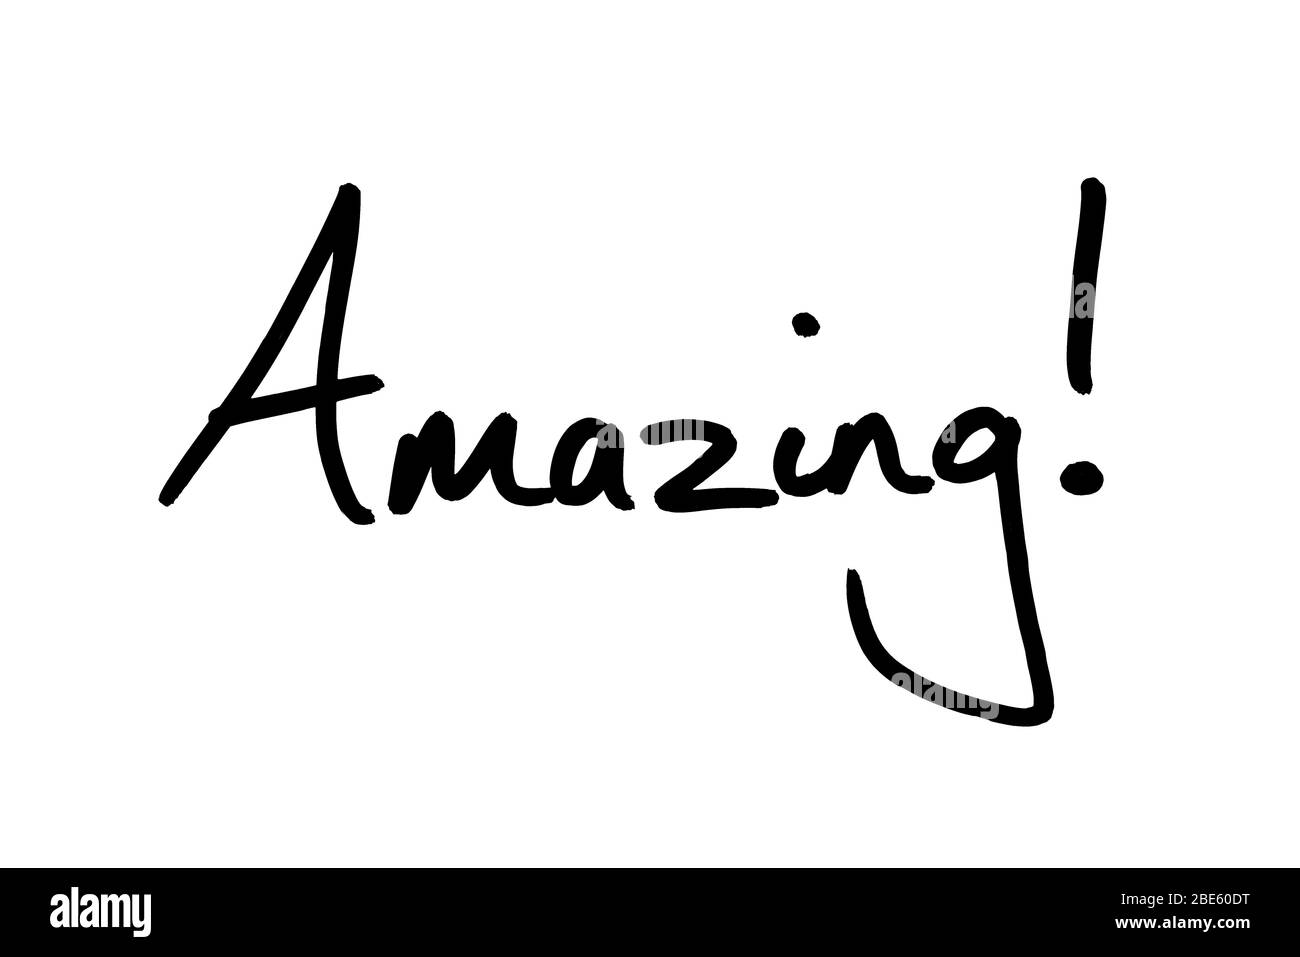 The word Amazing! handwritten on a white background. Stock Photo